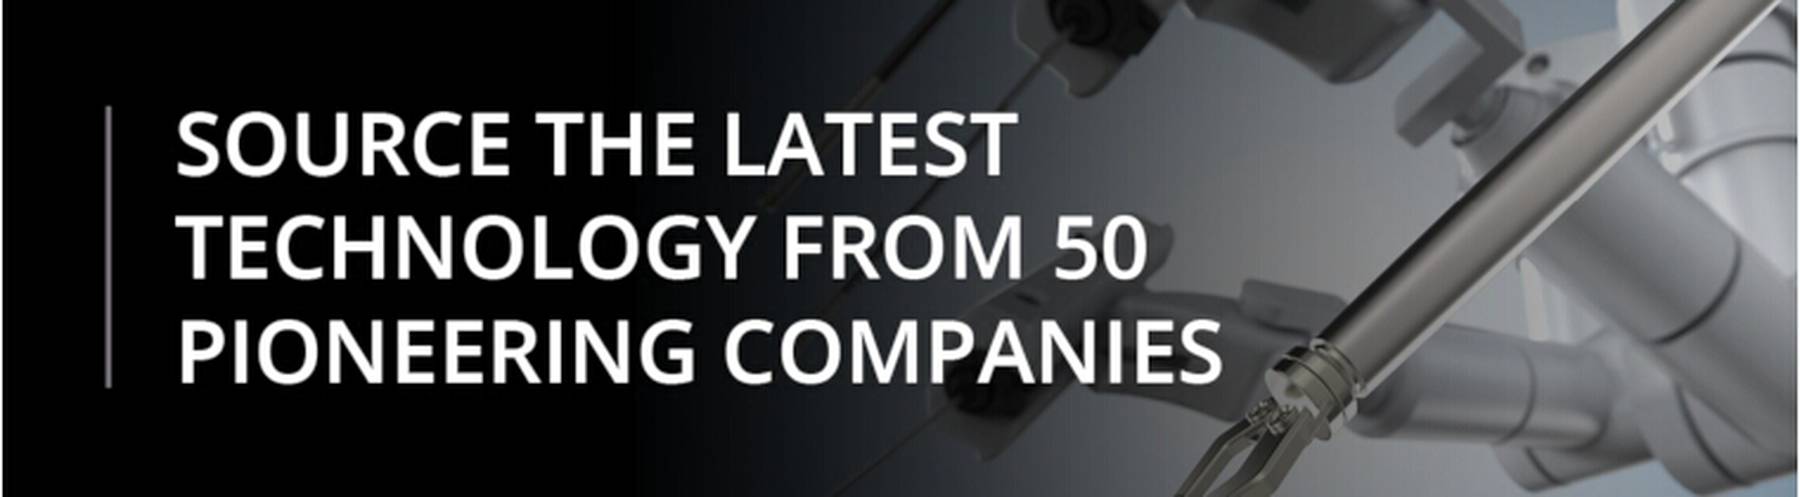 Source the latest technology from 50 pioneering companies